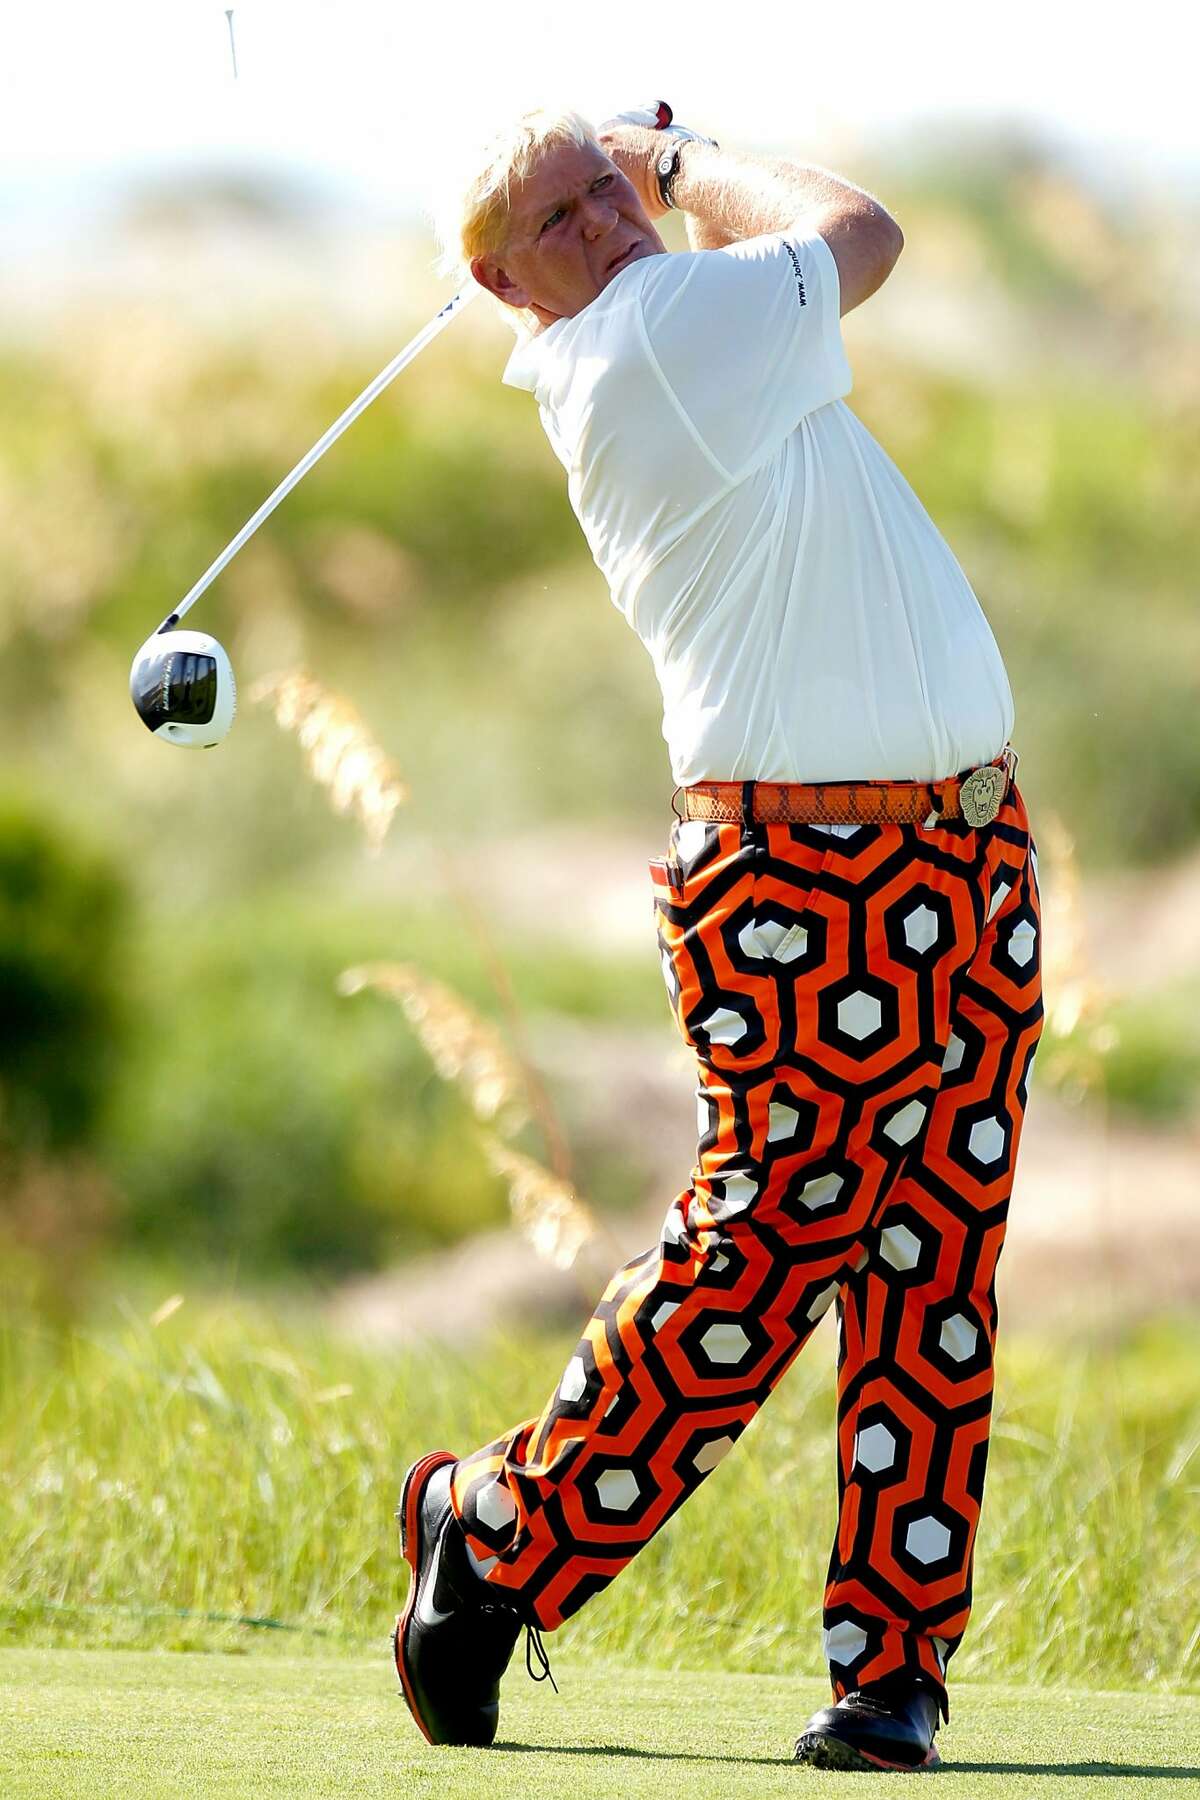 John Daly of the United States hits off the sixth tee during Round One of the 94th PGA Championship at the Ocean Course on August 9, 2012 in Kiawah Island, South Carolina. (Jonathan Ferrey / Getty Images)